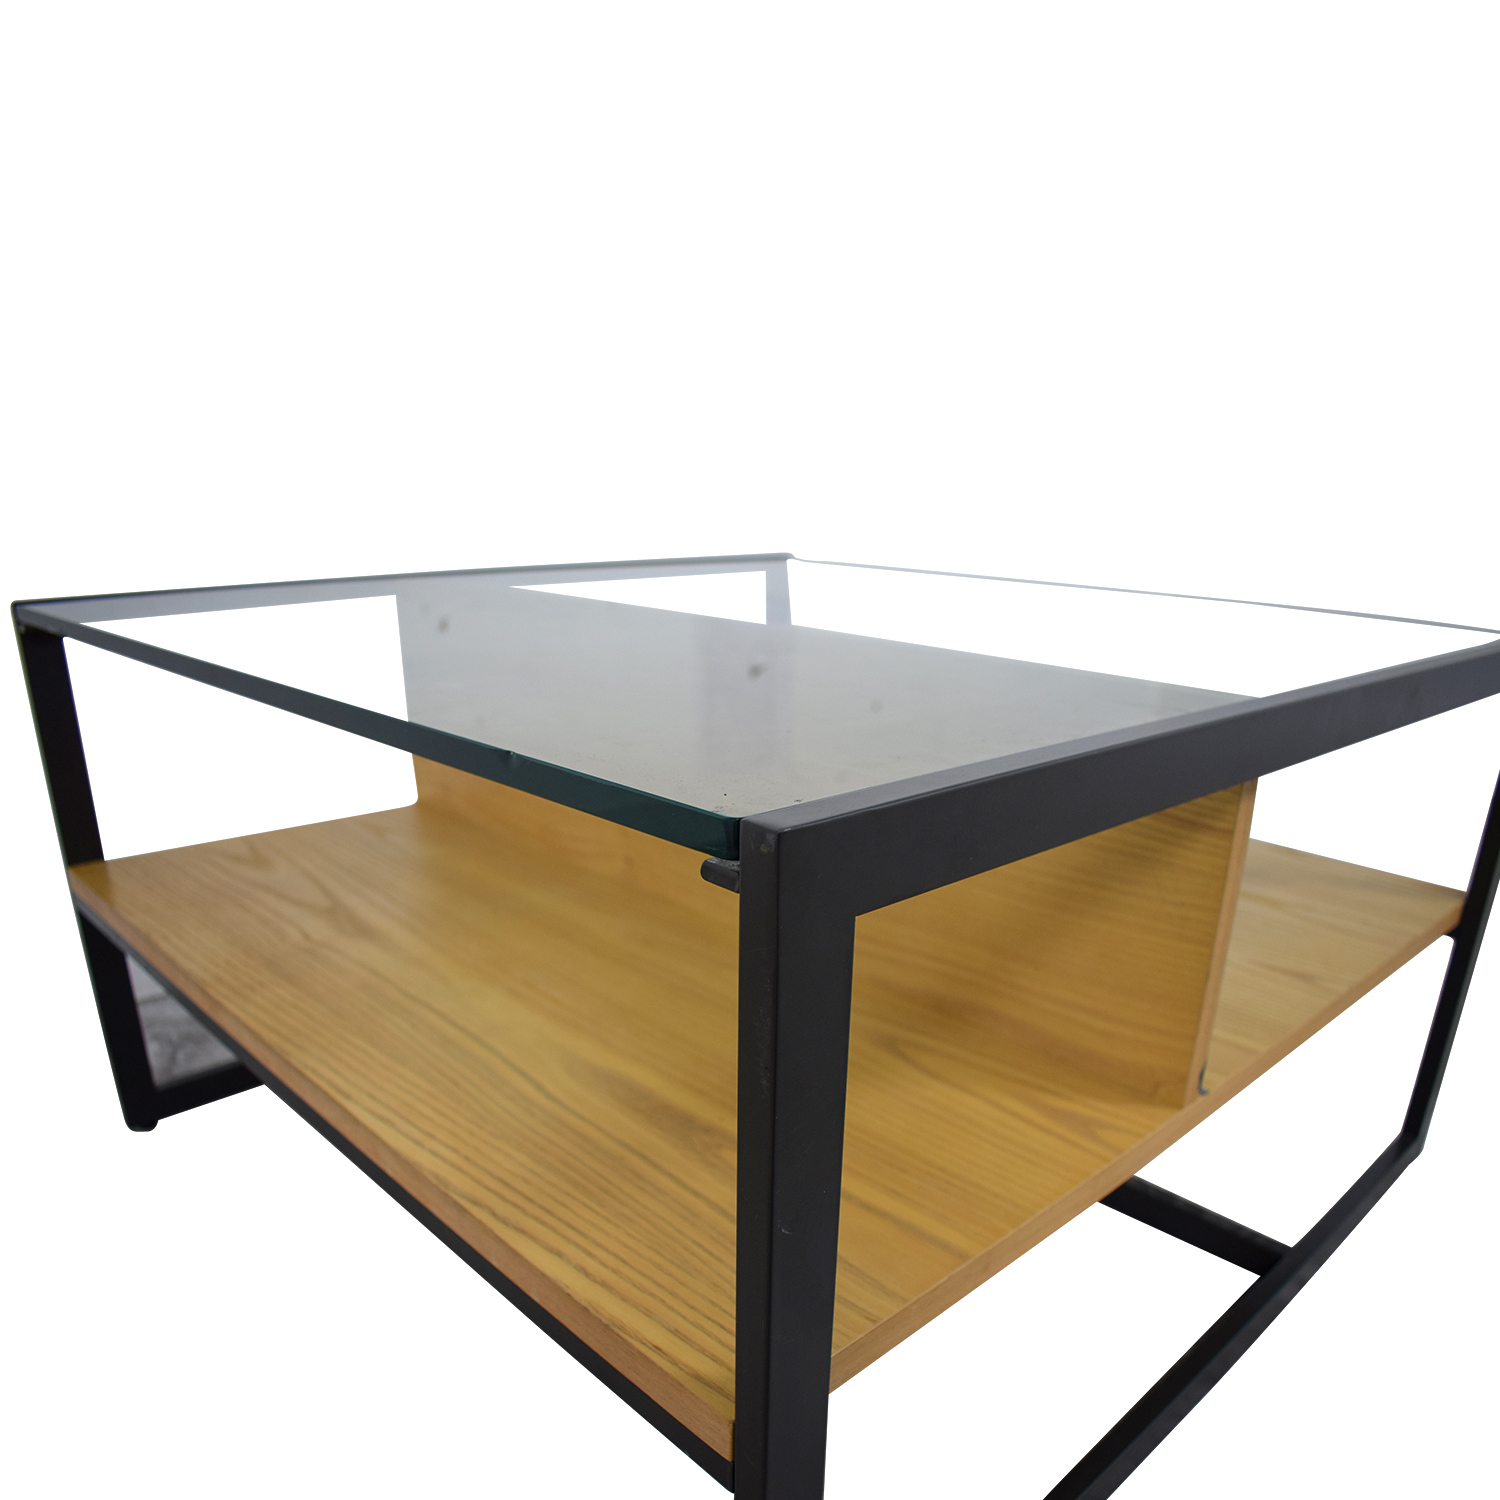 Origami Coffee Table West Elm 85 Off West Elm West Elm Wood And Glass Coffee Table Tables